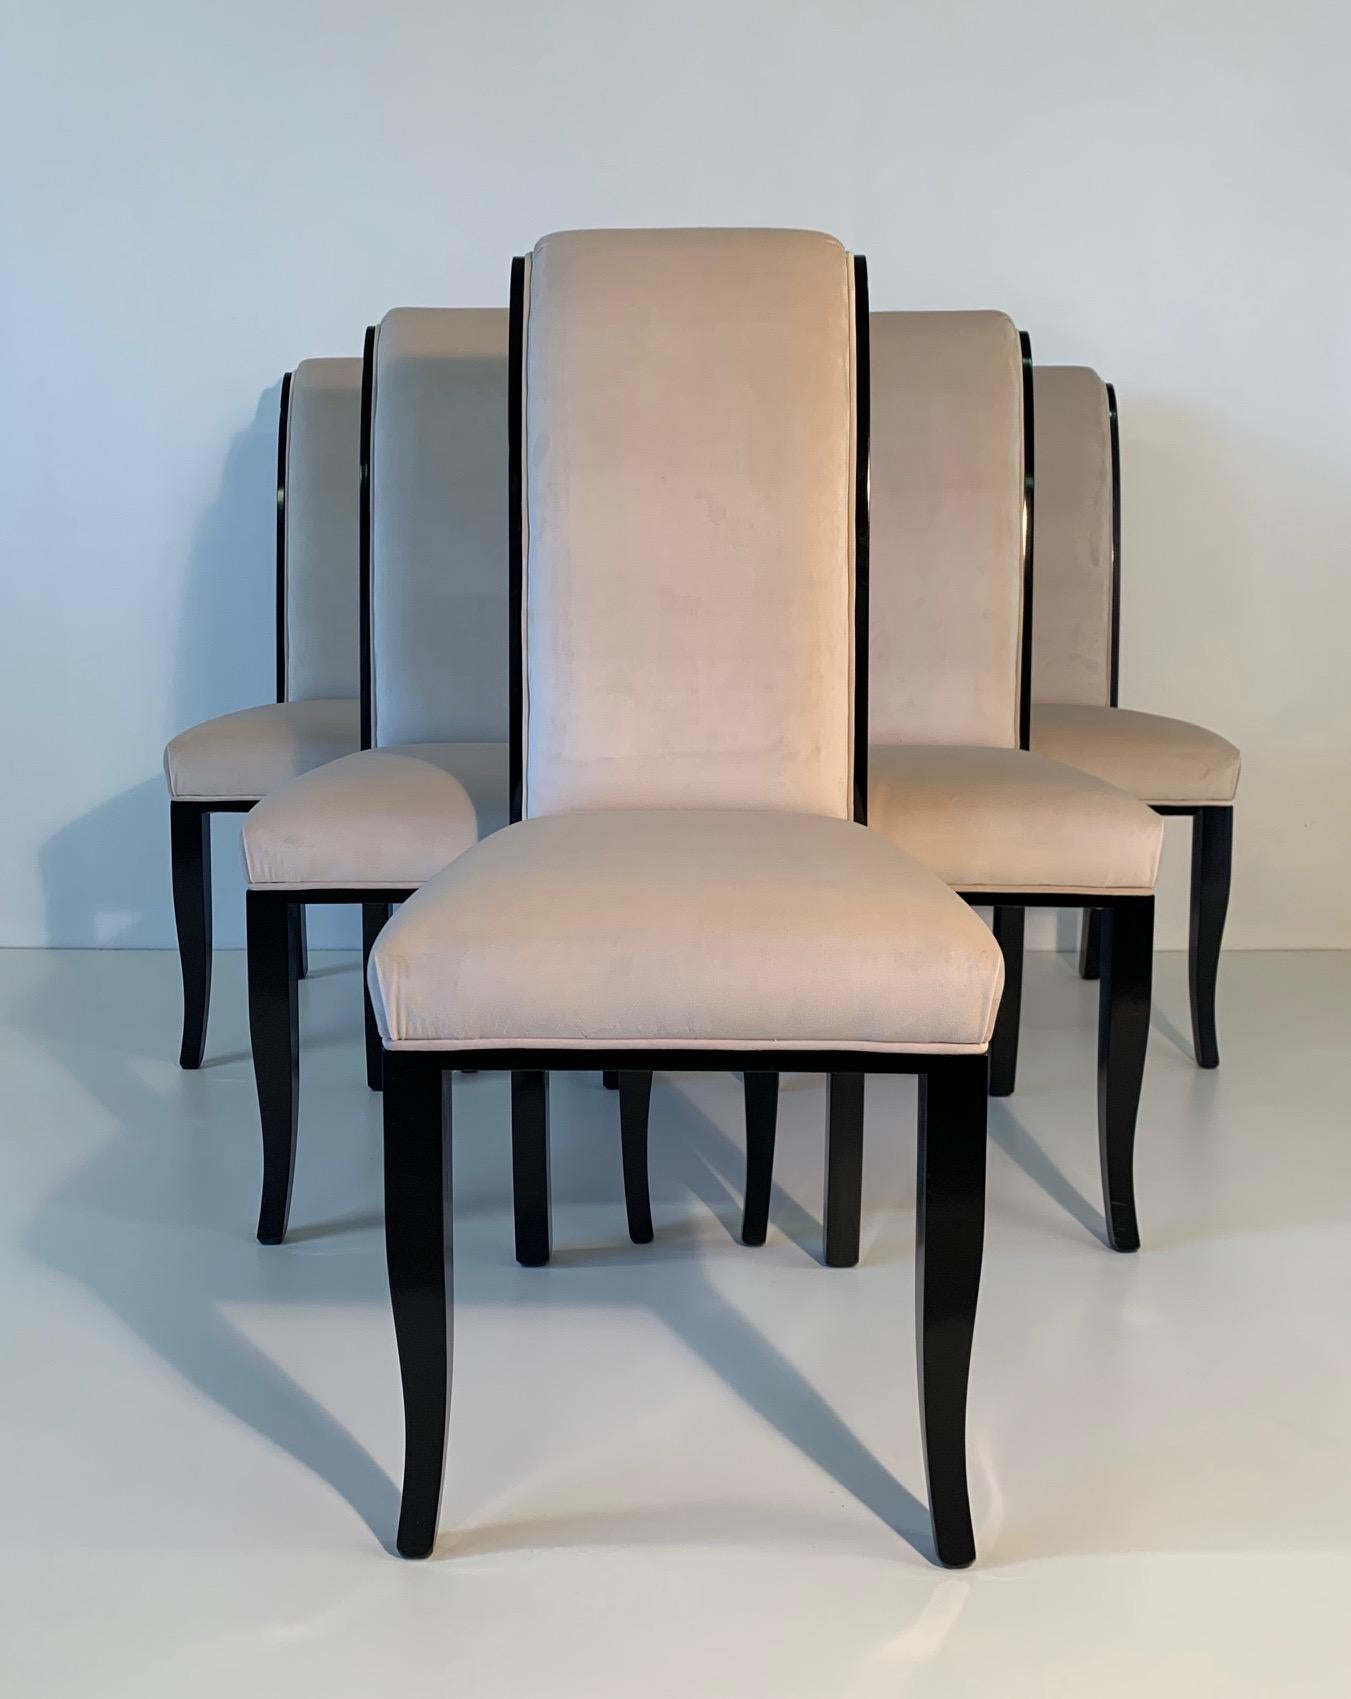 Elegant Art Deco chairs covered in fine ivory velvet and black lacquered structure.
Both the padding and the wooden part has been completely restored.